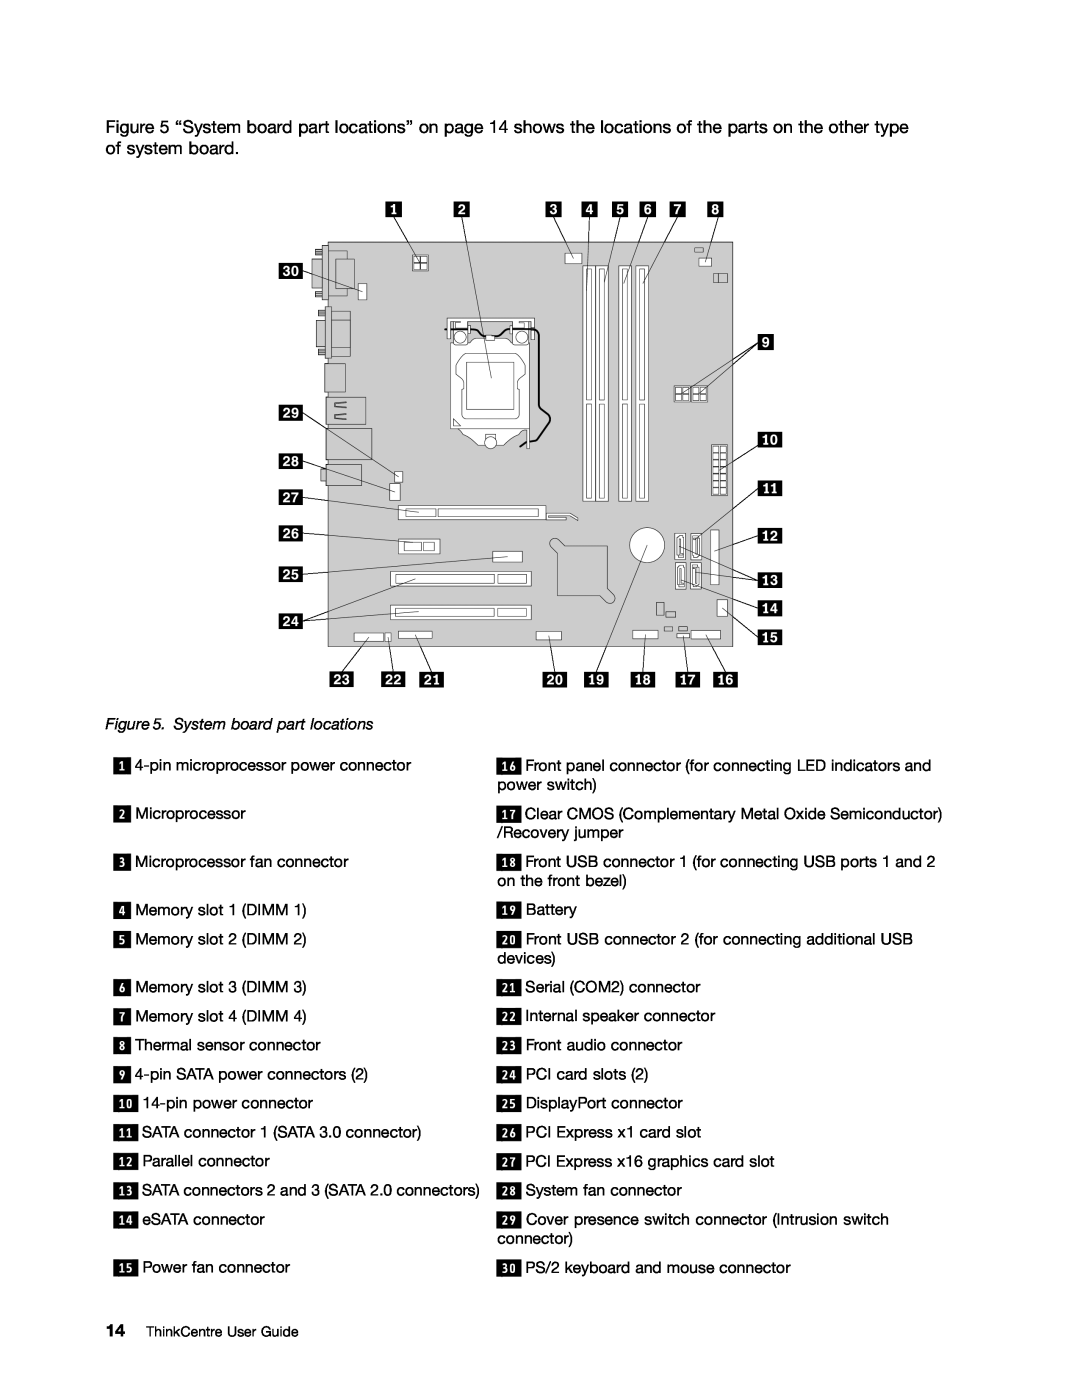 Lenovo 2756D7U, 2697 manual System board part locations, ThinkCentre User Guide 